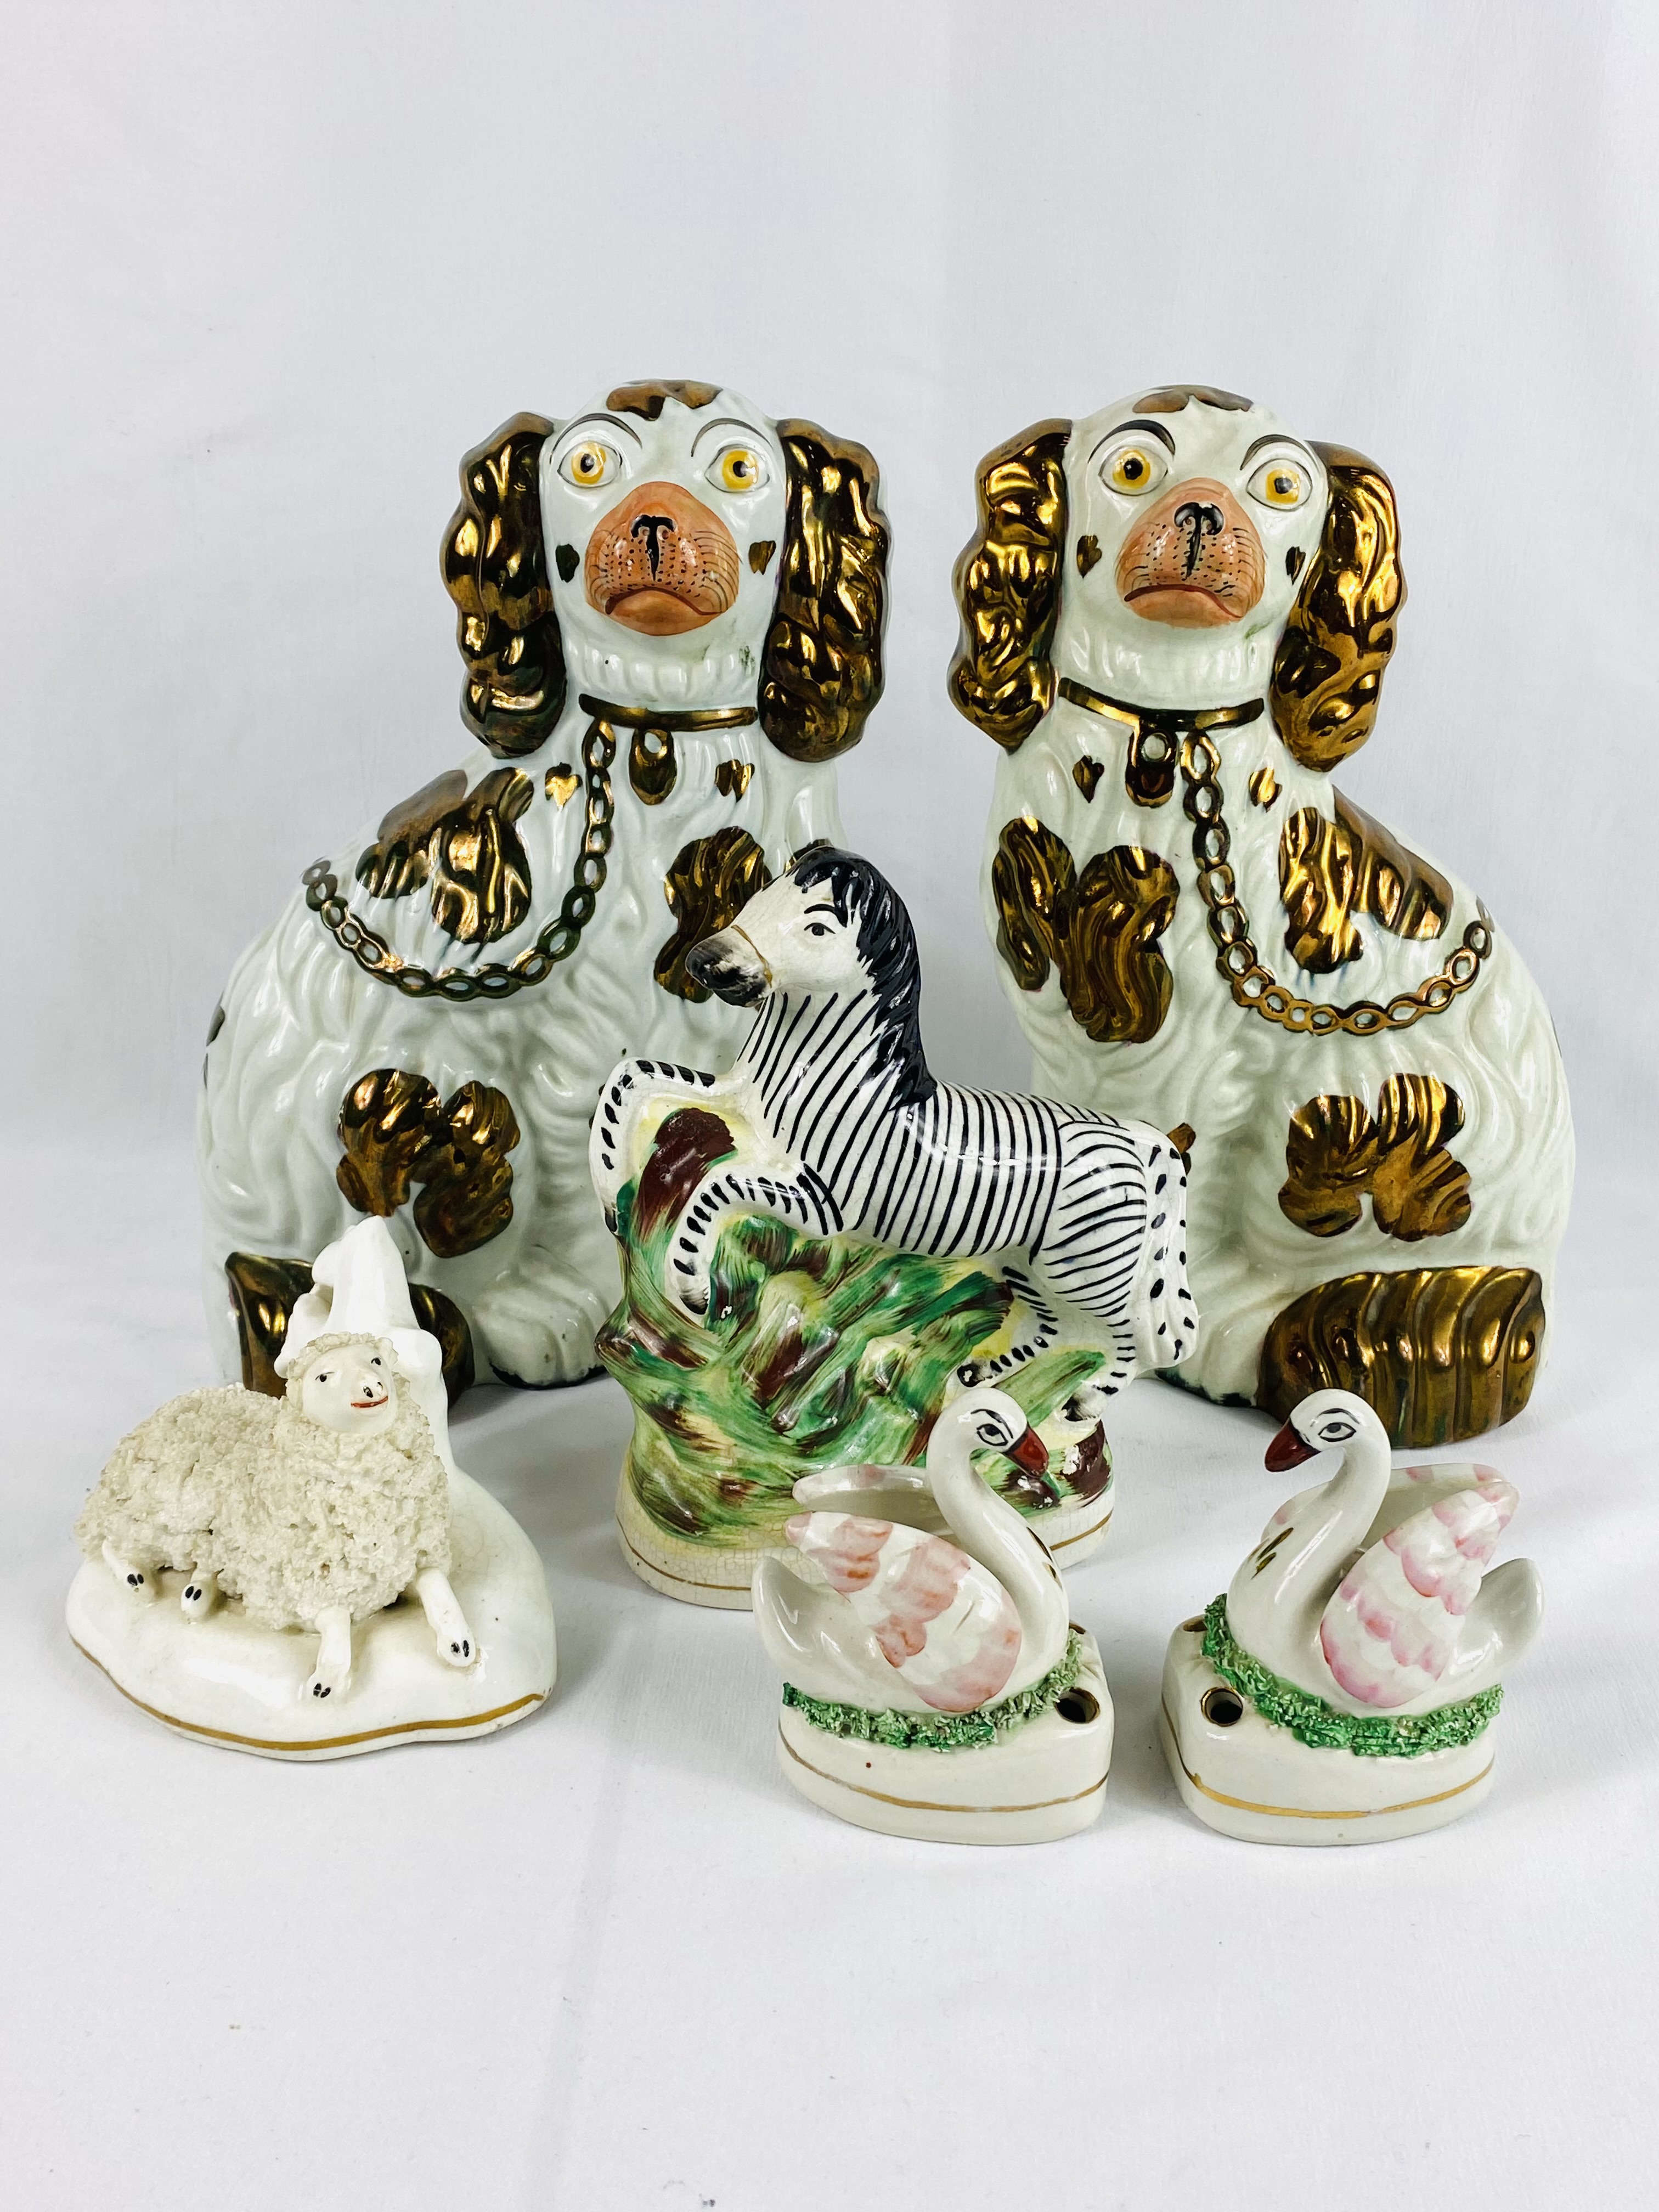 A collection of 19th century Staffordshire